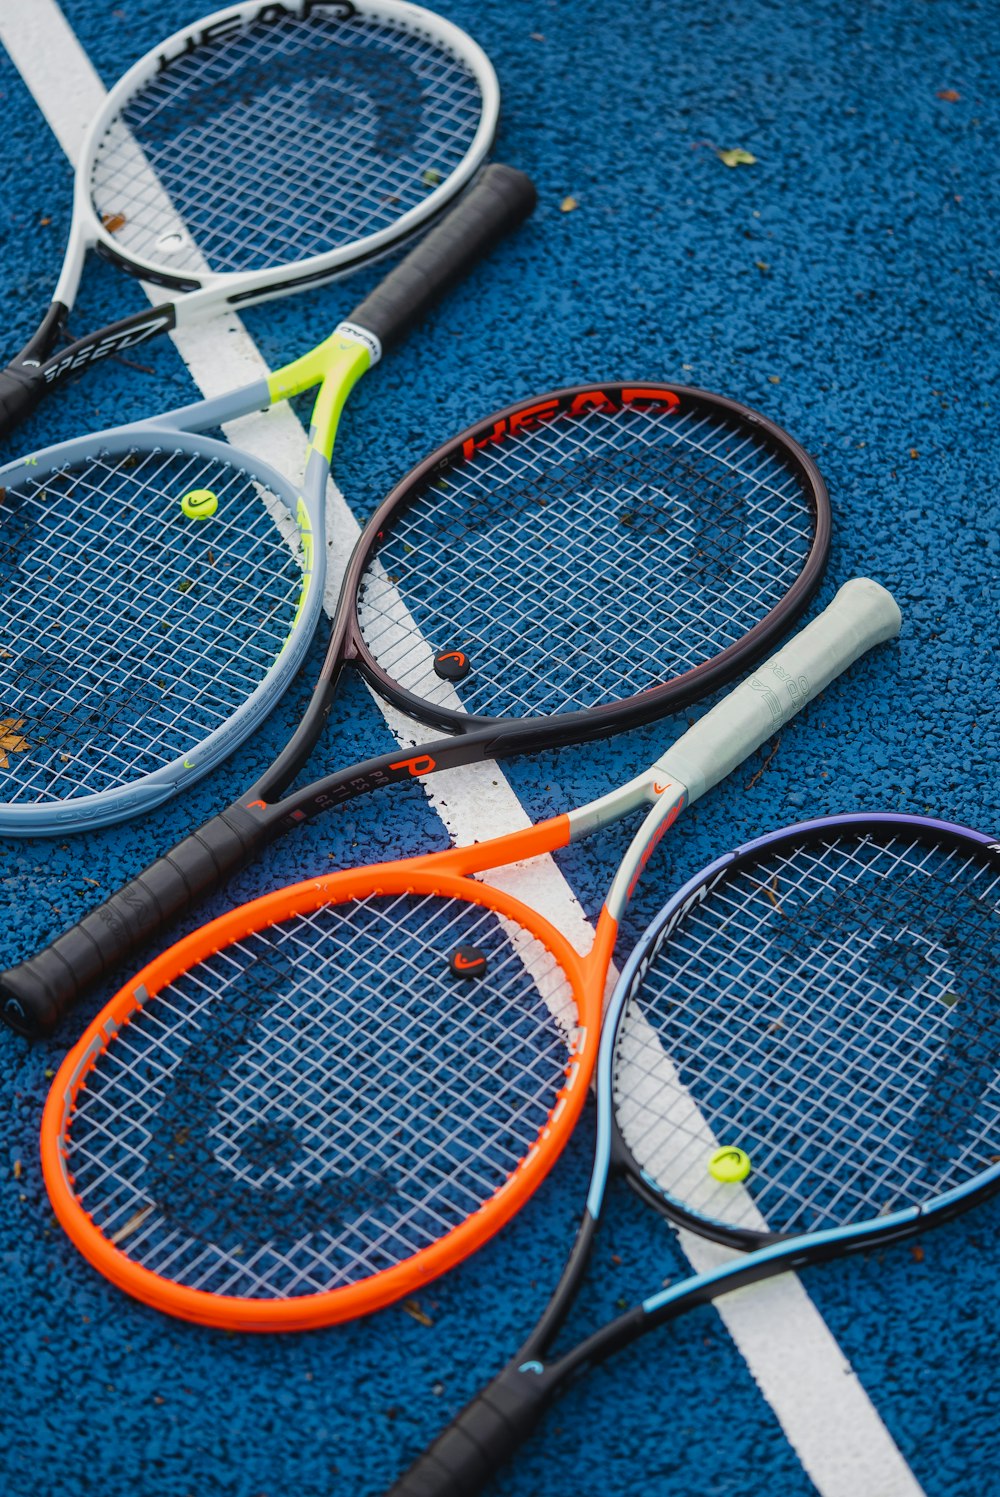 three tennis rackets laying on a tennis court